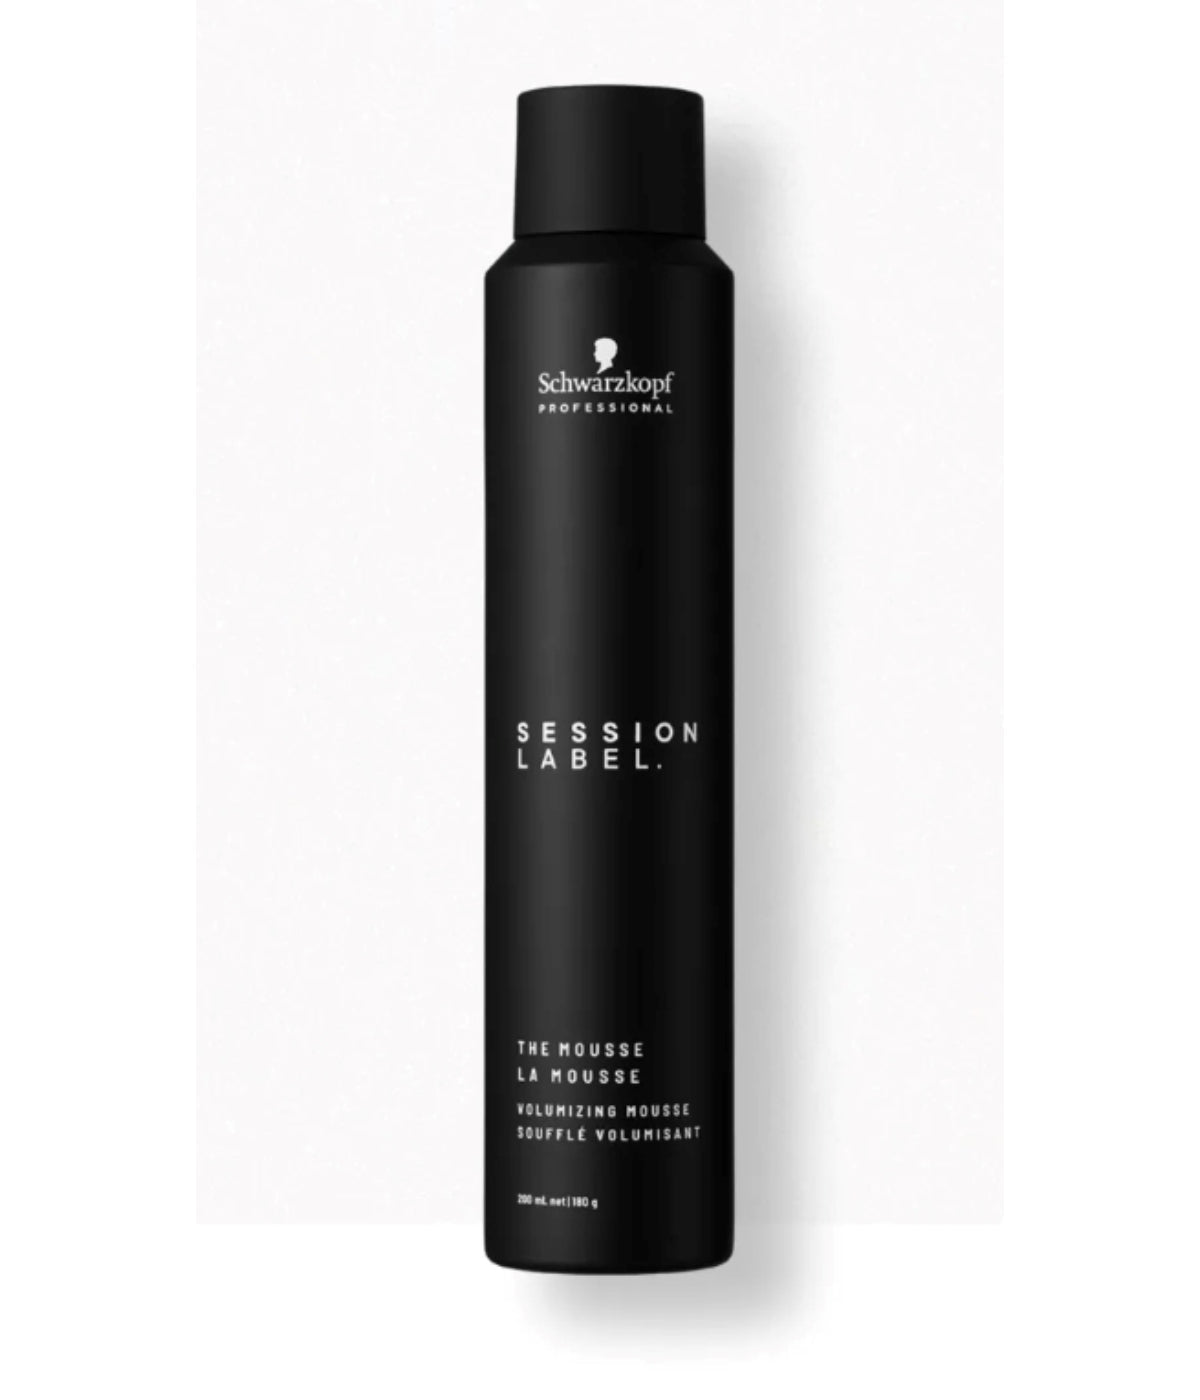 Schwarzkopf Osis+ Session Label The Mousse Volumizing Souffle, 200mL - by Schwarzkopf |ProCare Outlet|